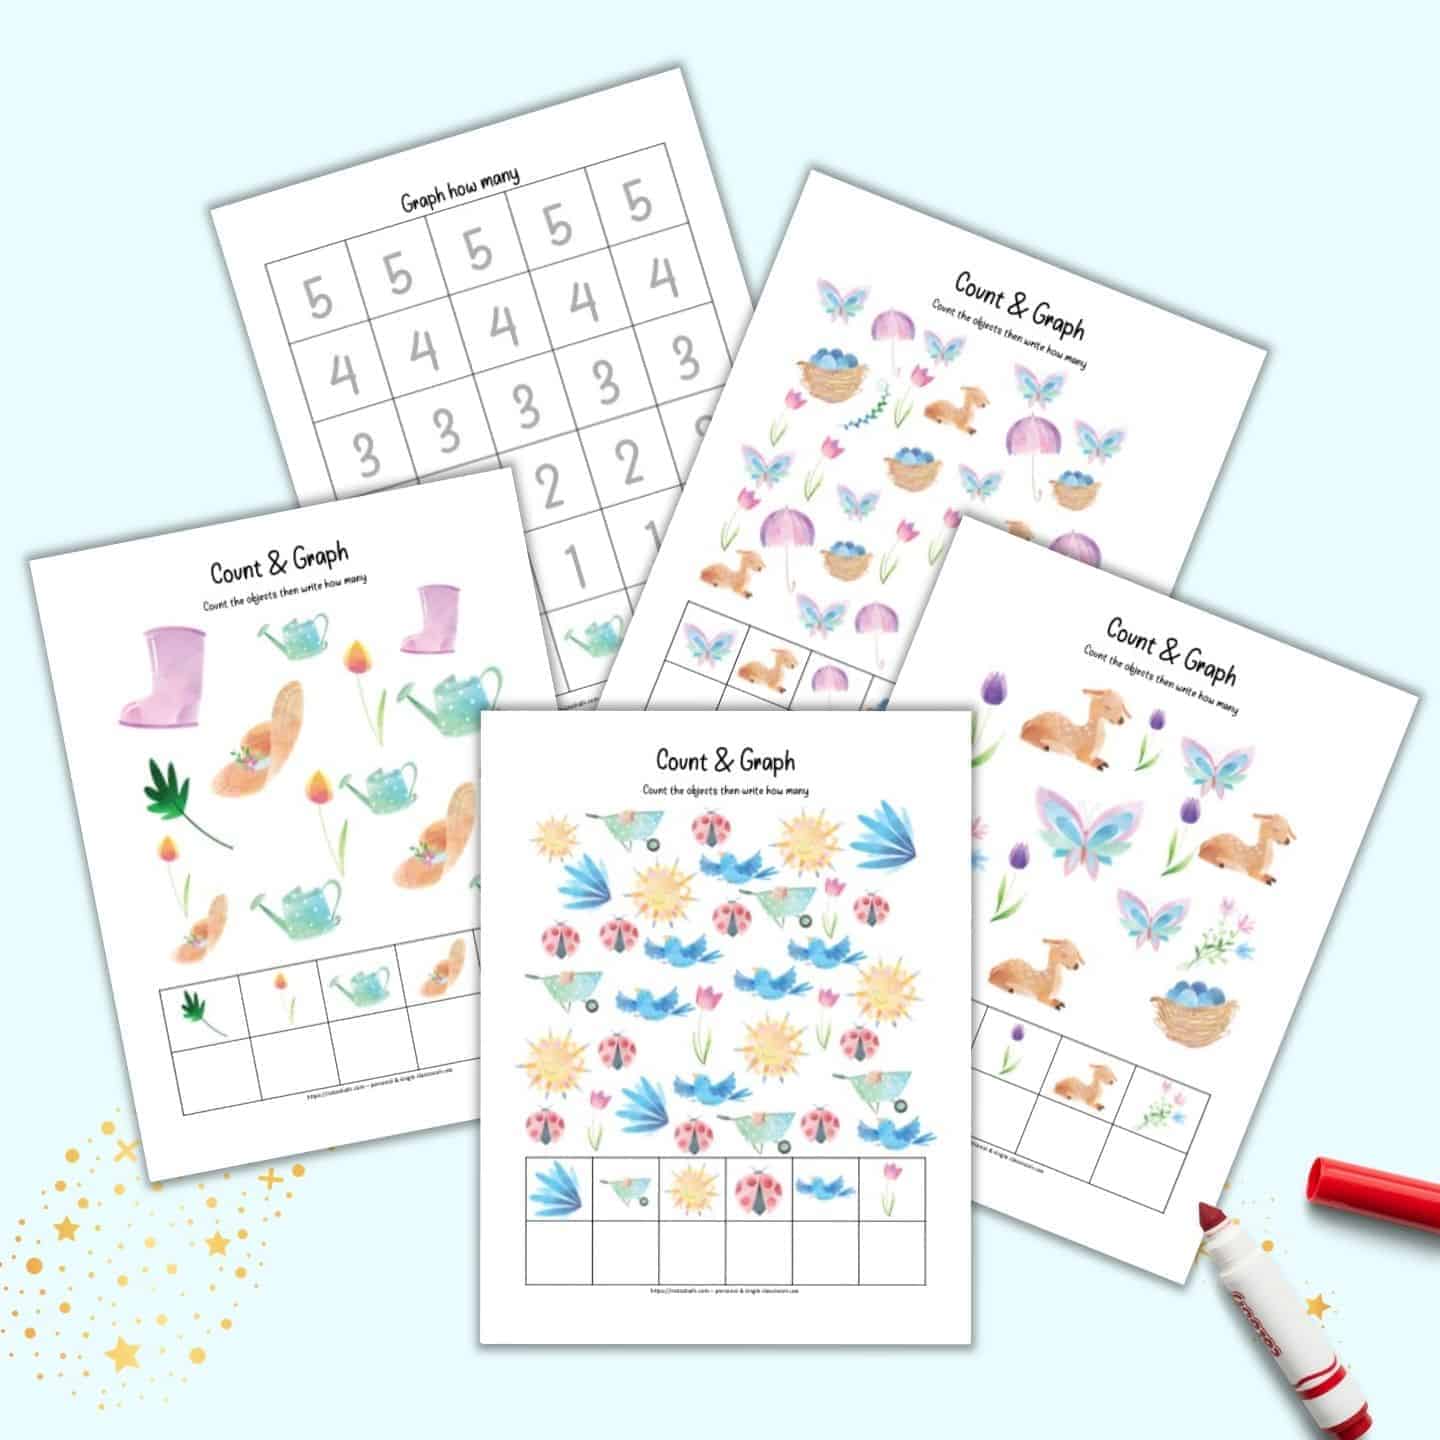 Free Printable Spring I Spy Count & Graph Worksheets   The Artisan ...